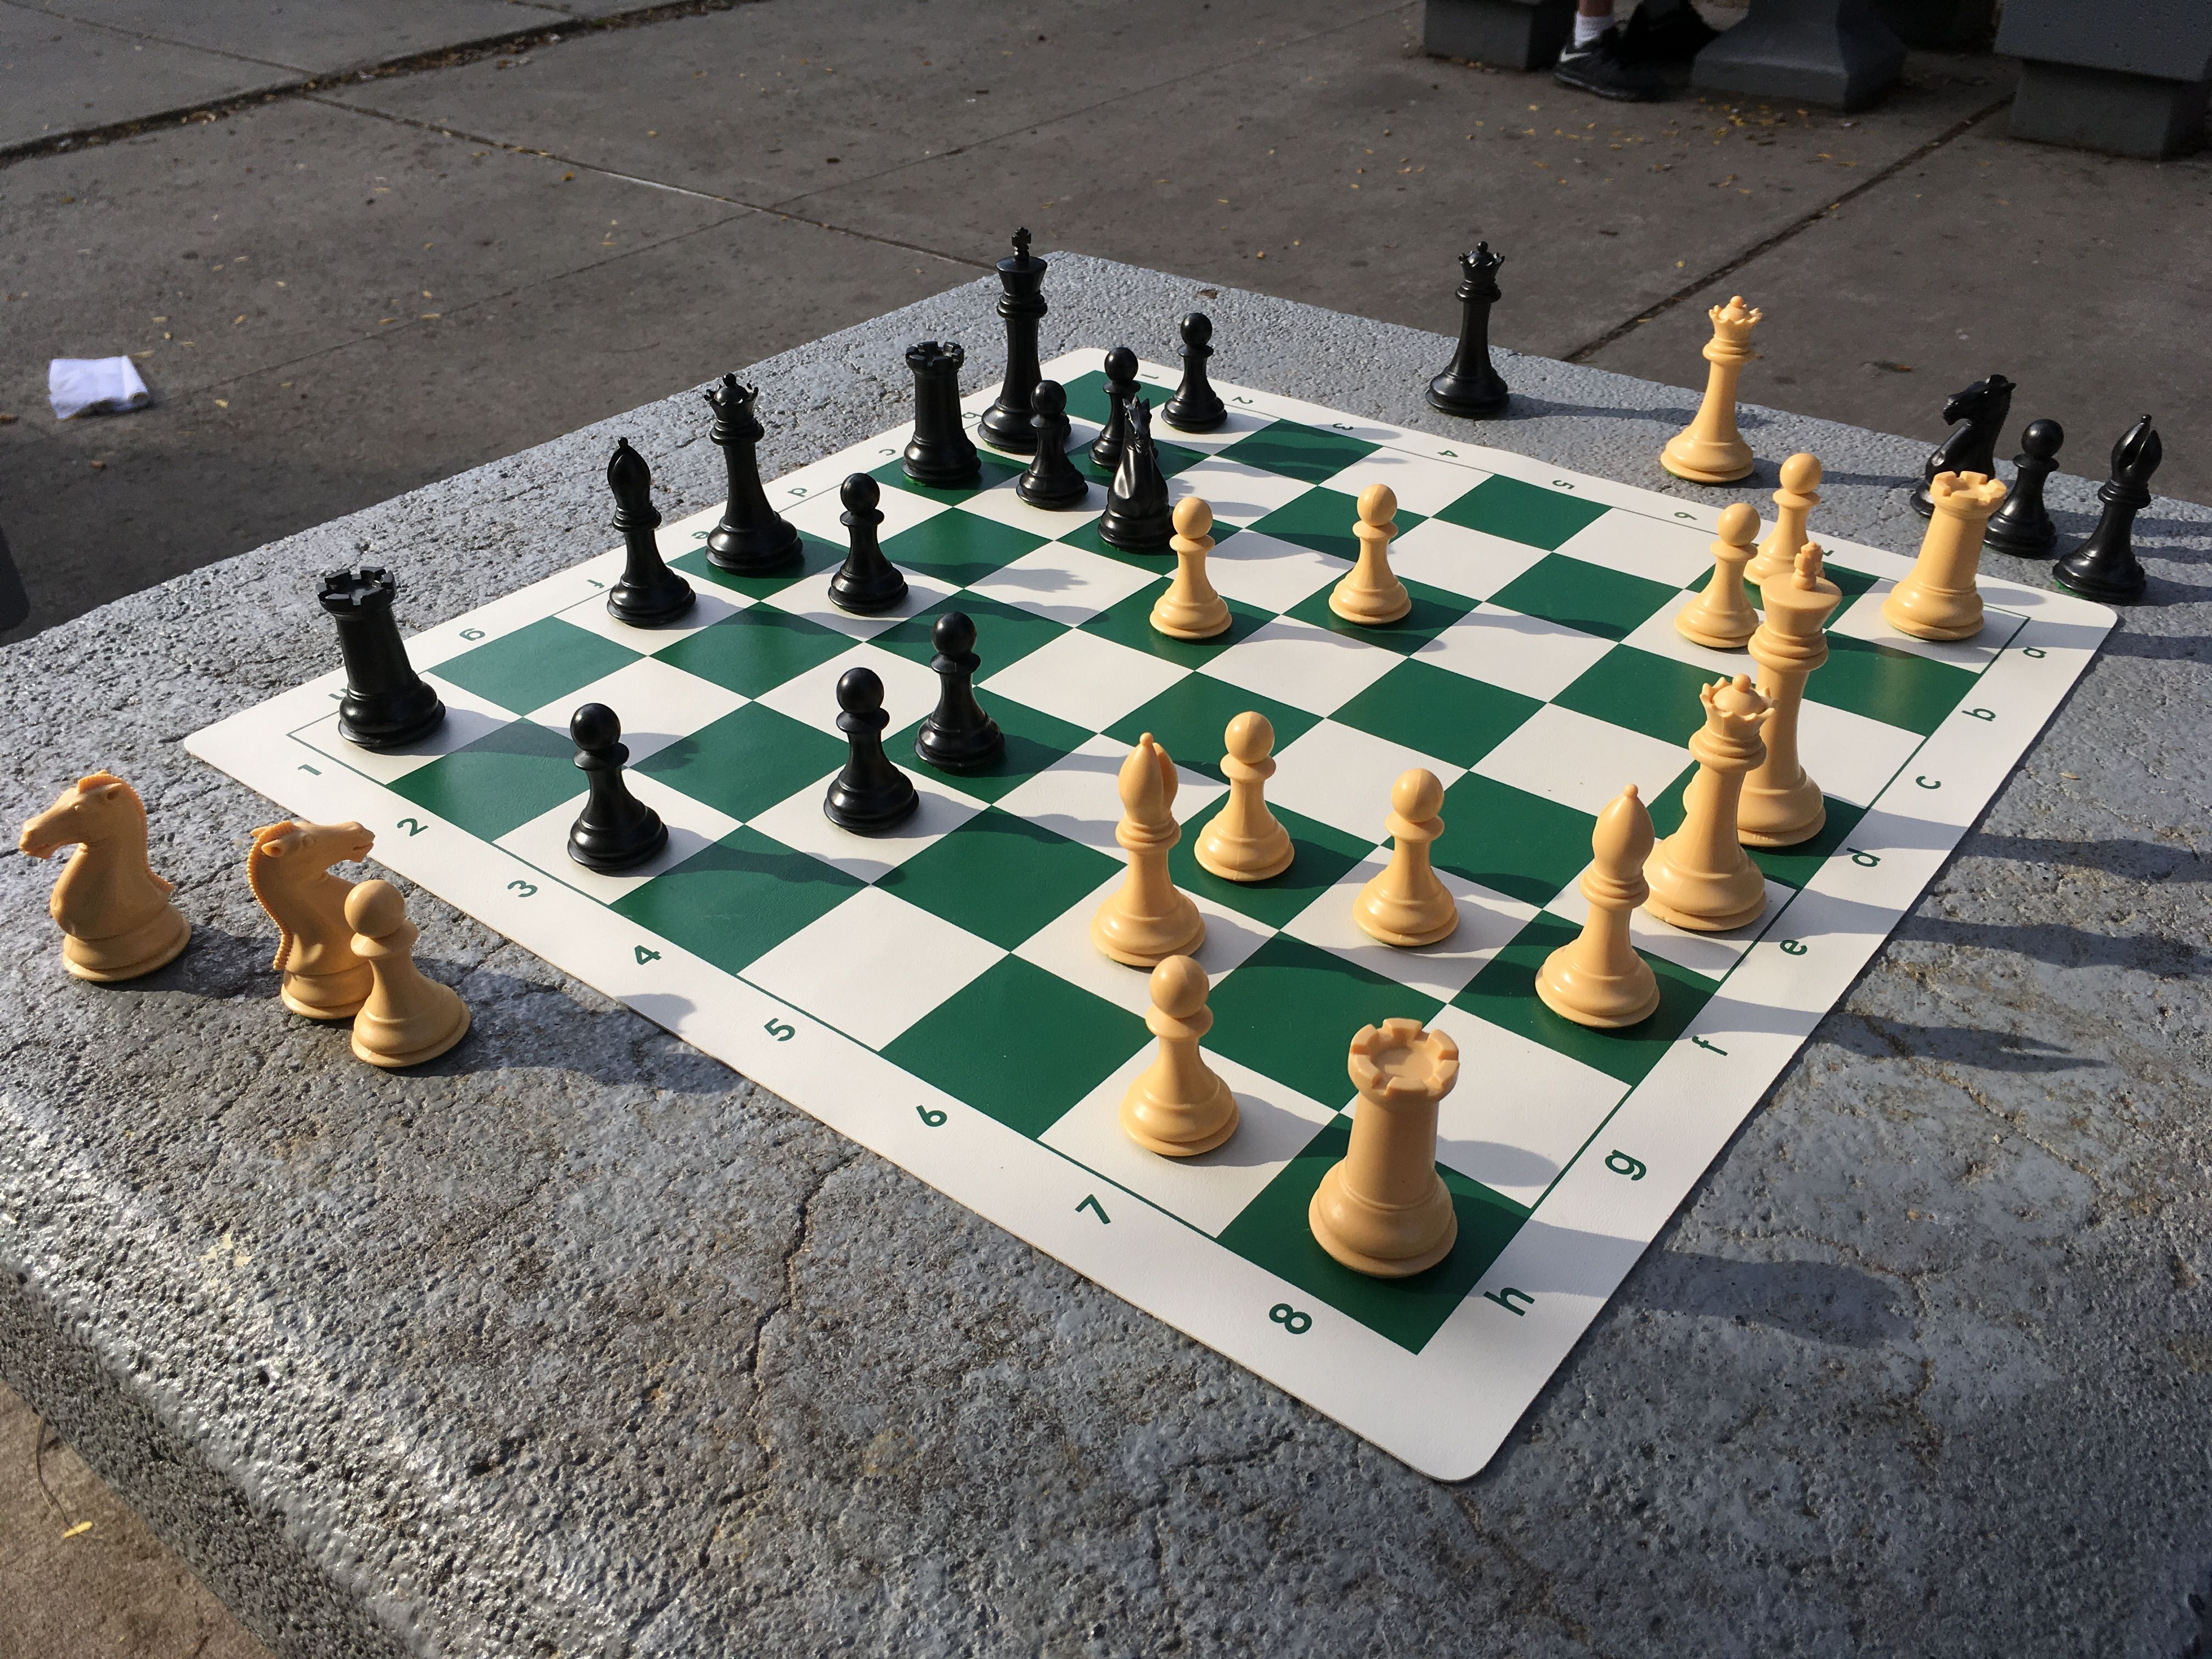 Combo of the Study Analysis Plastic Chess Pieces & Wooden Chess